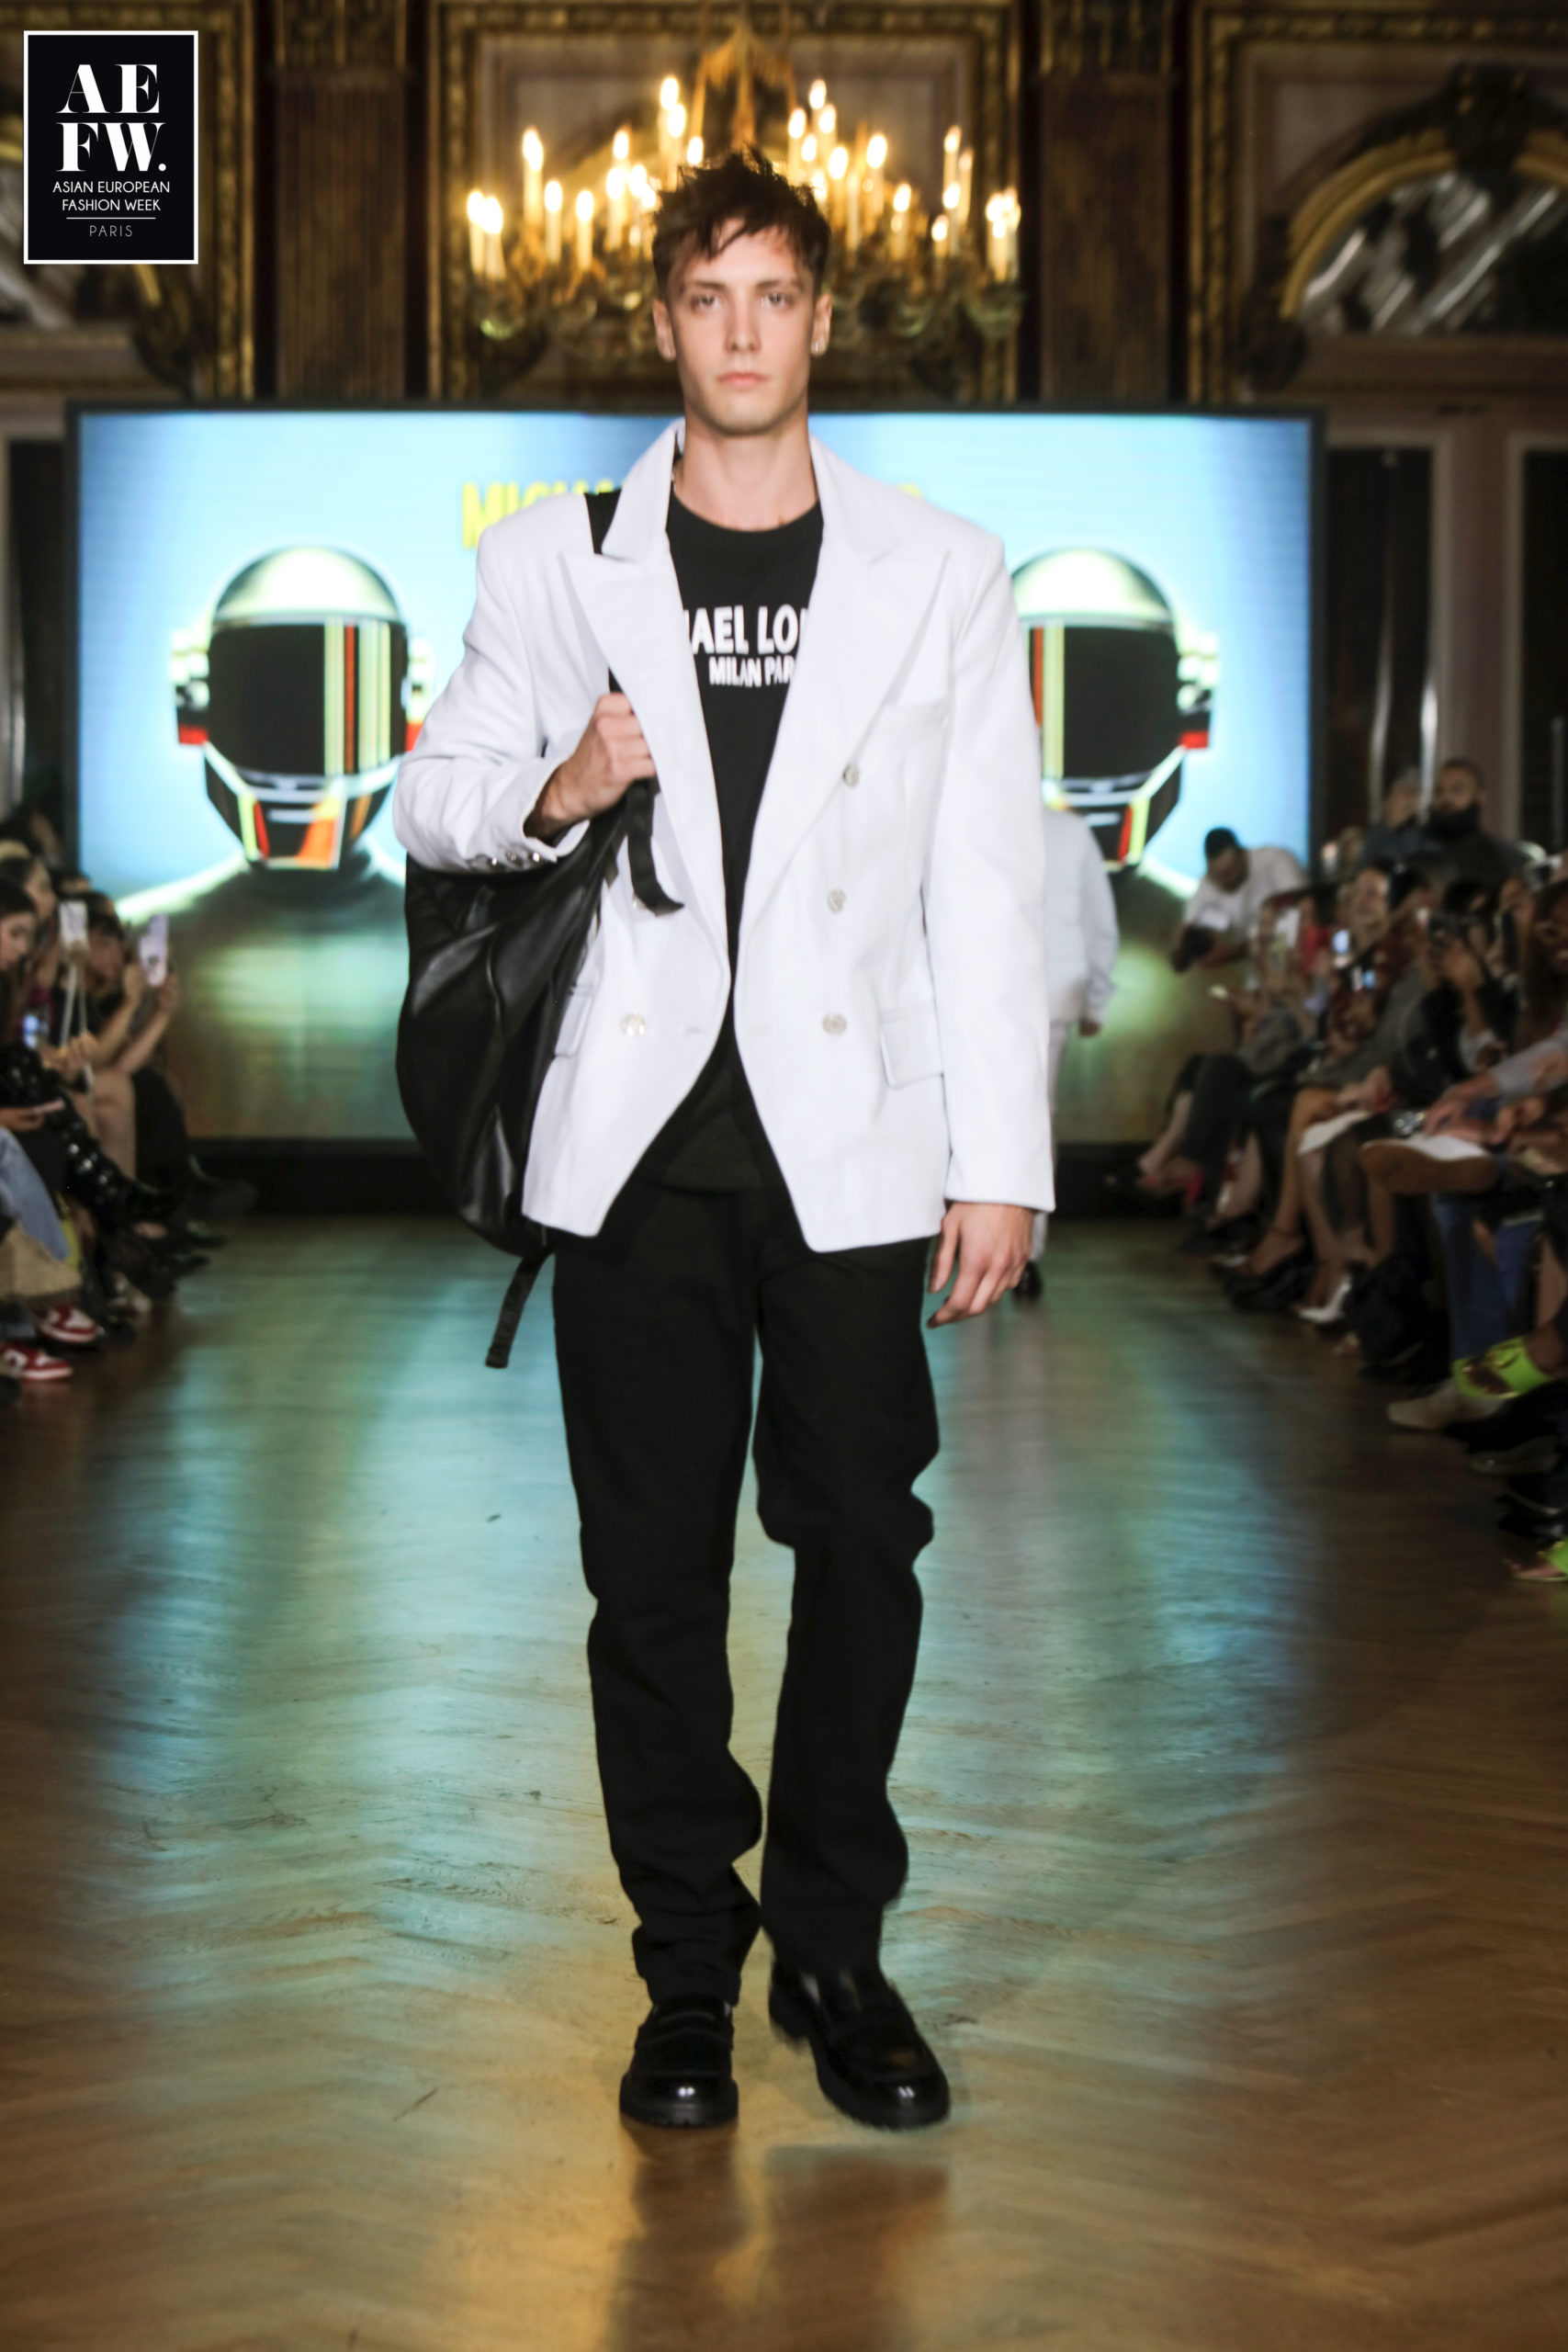 MICHAEL-LOMBARD-PFW-SS24-AEFW-WEST-IN-PARIS-VENDOME--DN-AFRICA-Media-Partner-6A6A1421